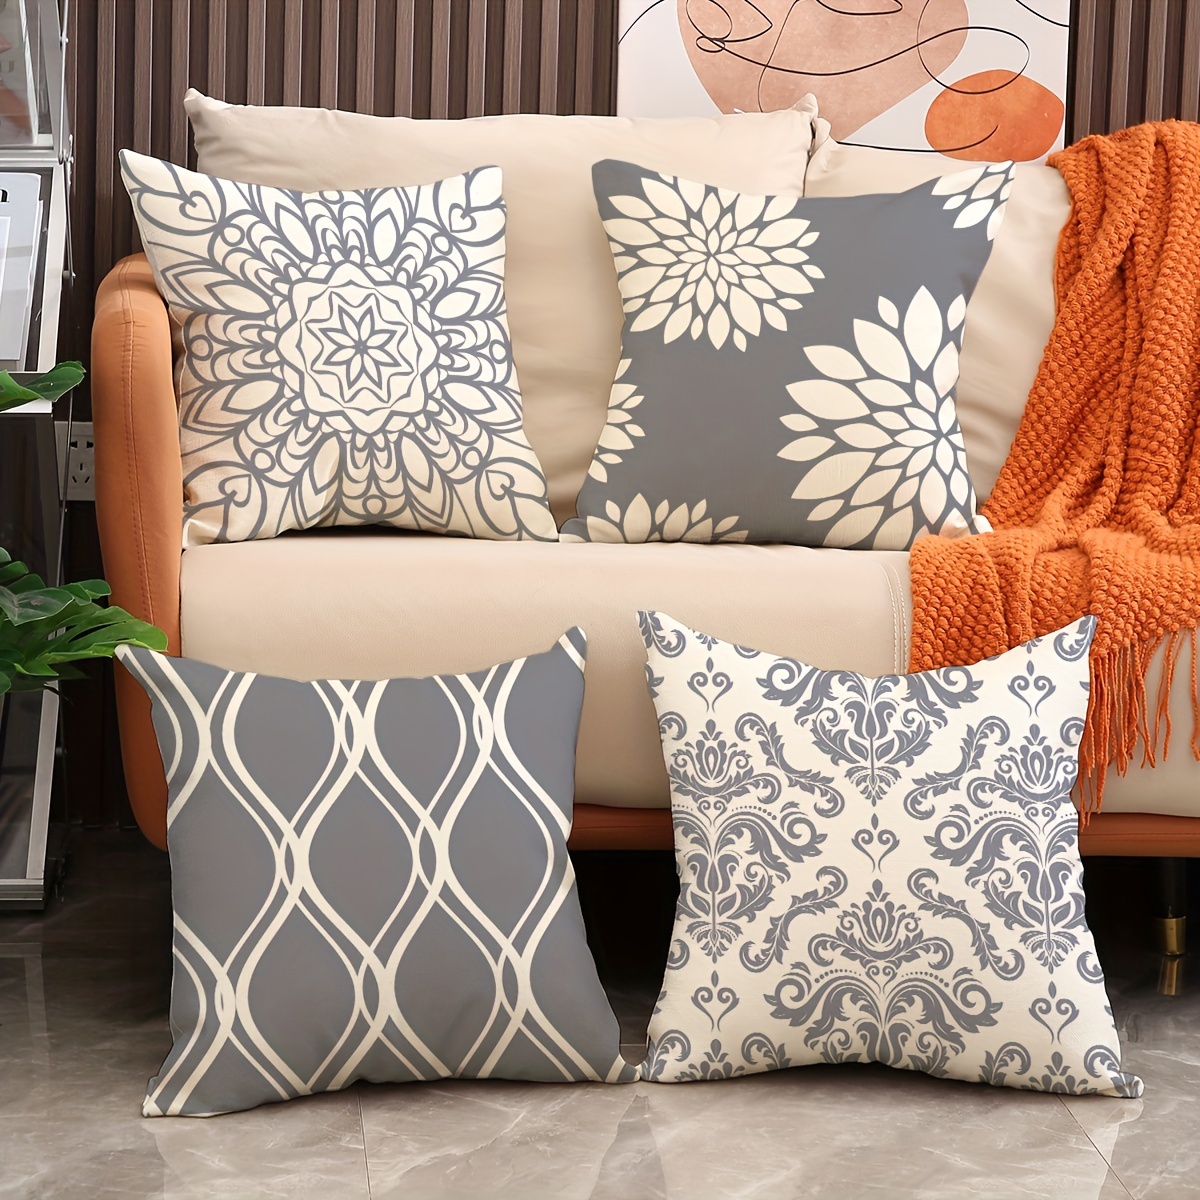 

Set Of 4 Gray Geometric Pattern Pillow Covers For Home Sofa Cushions, Made Of Linen Blend, 18*18 Inches, Pillow Core Not Included.